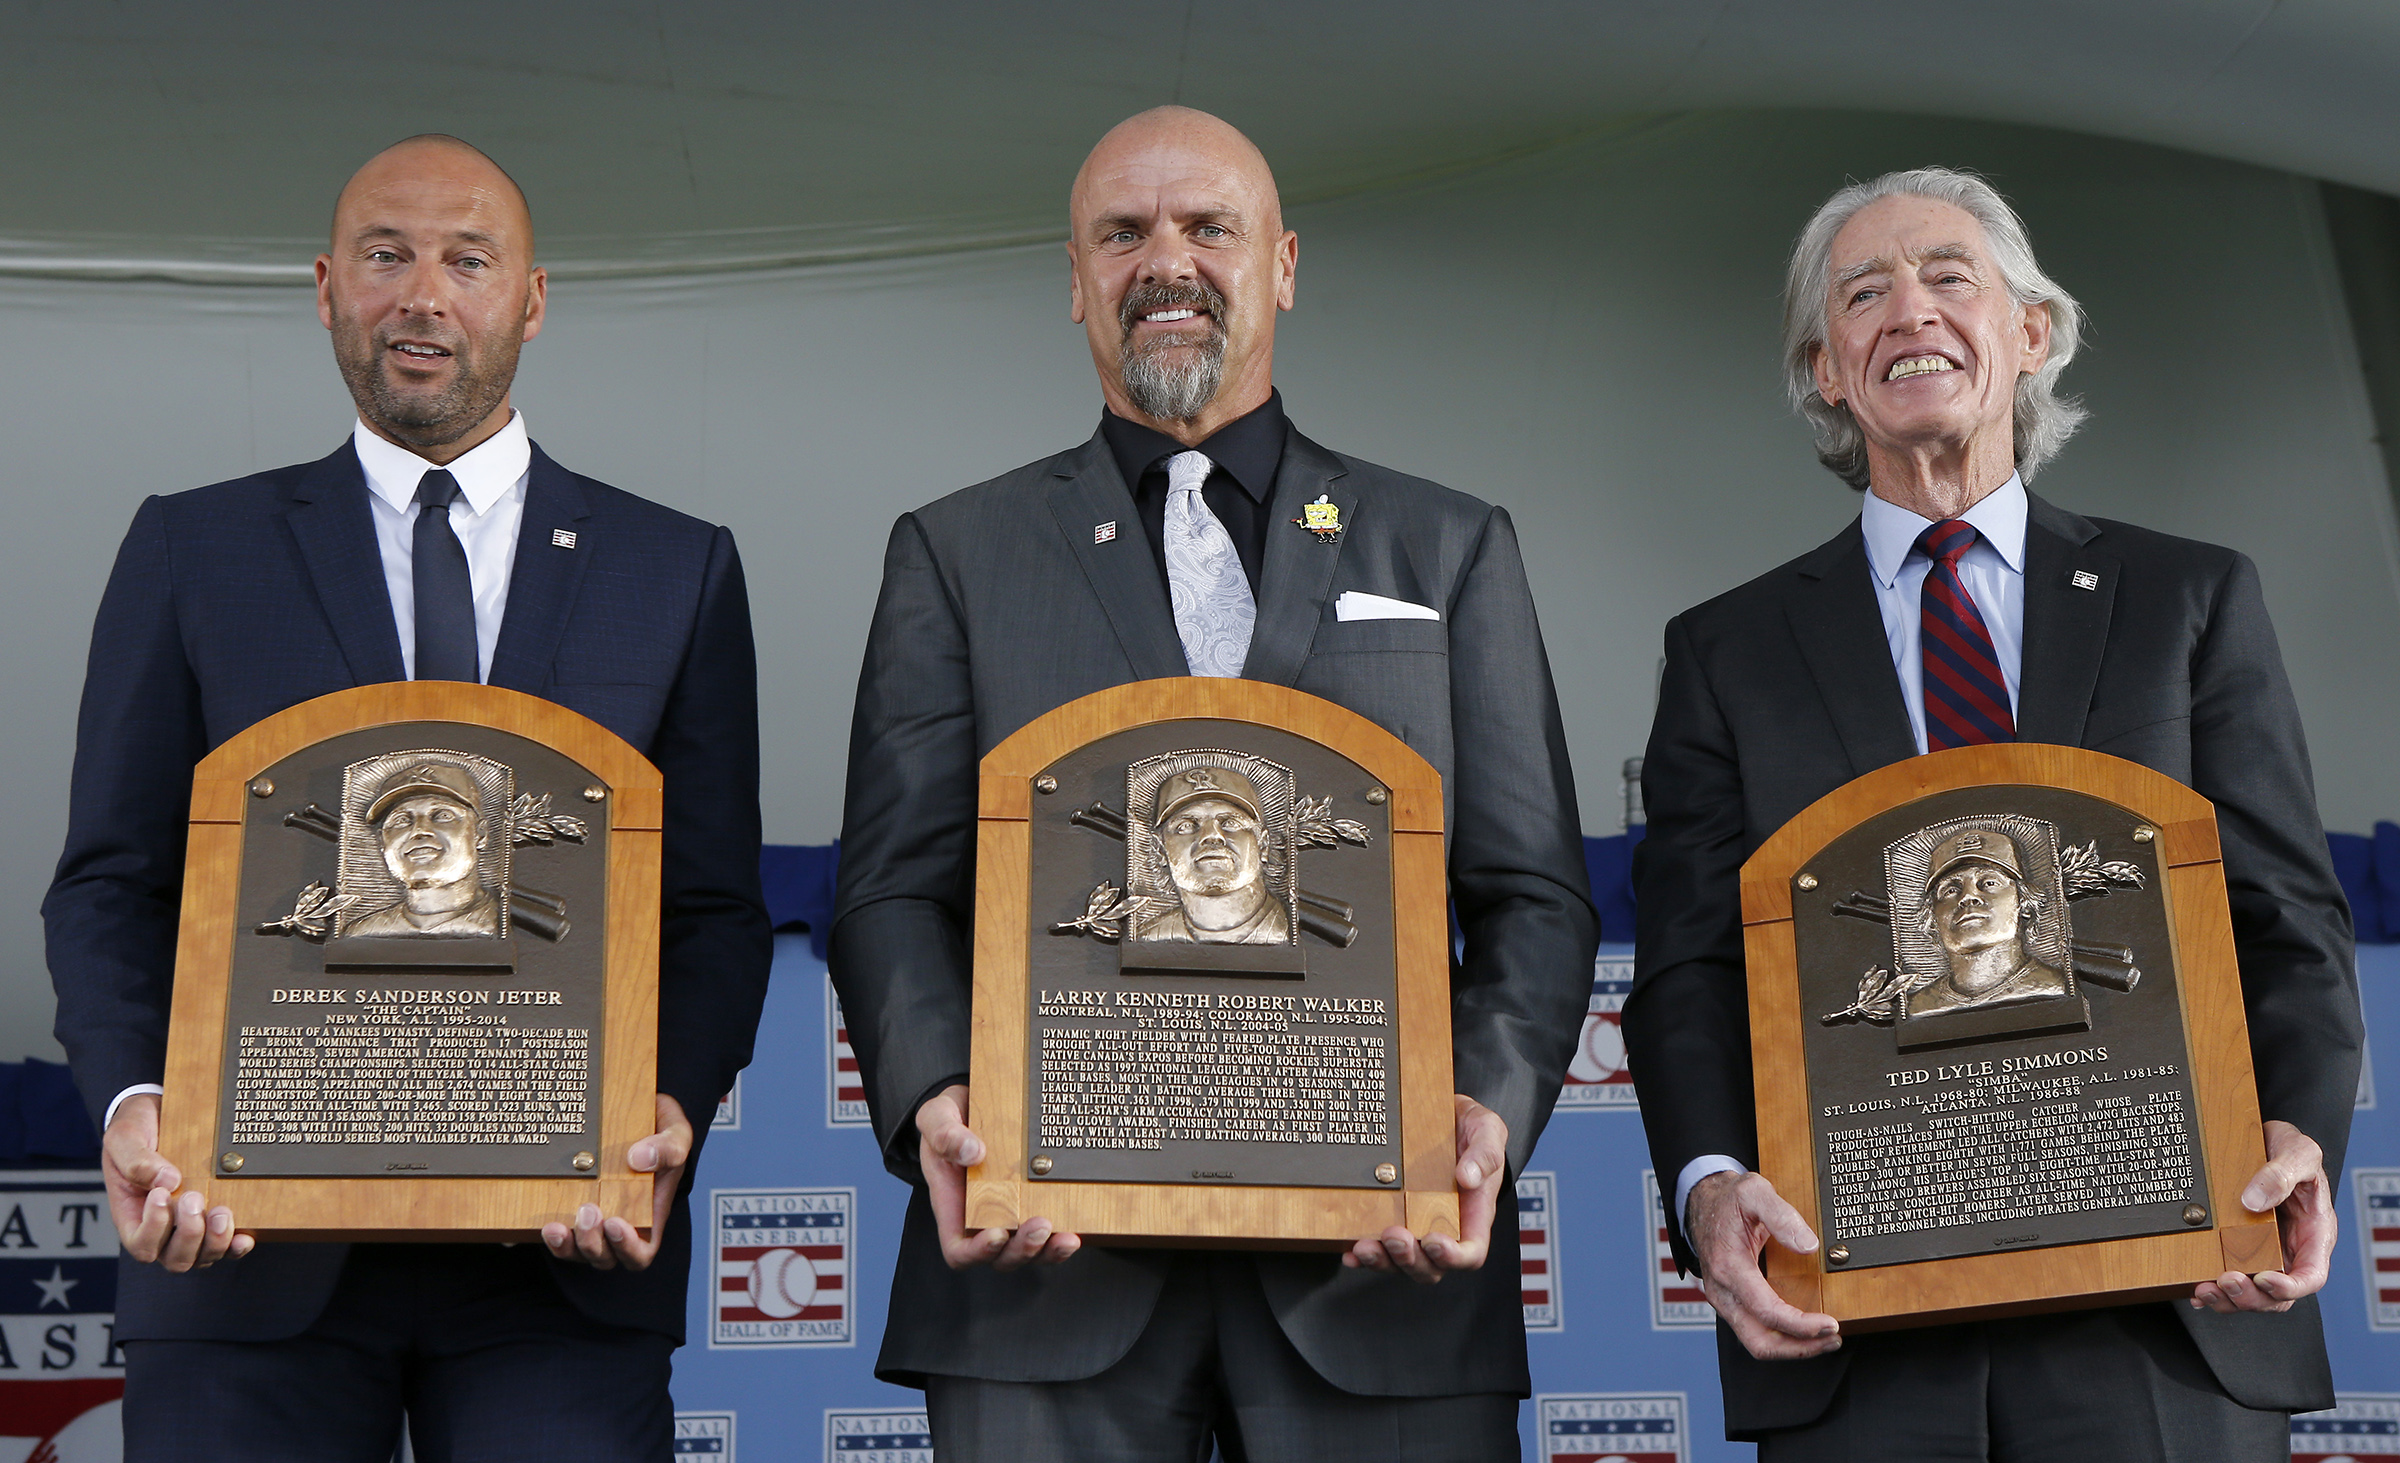 Derek Jeter, Larry Walker and Ted Simmons pose for a photograph with their plaques during the Baseball Hall of Fame induction ceremony at Clark Sports Center on September 08, 2021 in Cooperstown, New York